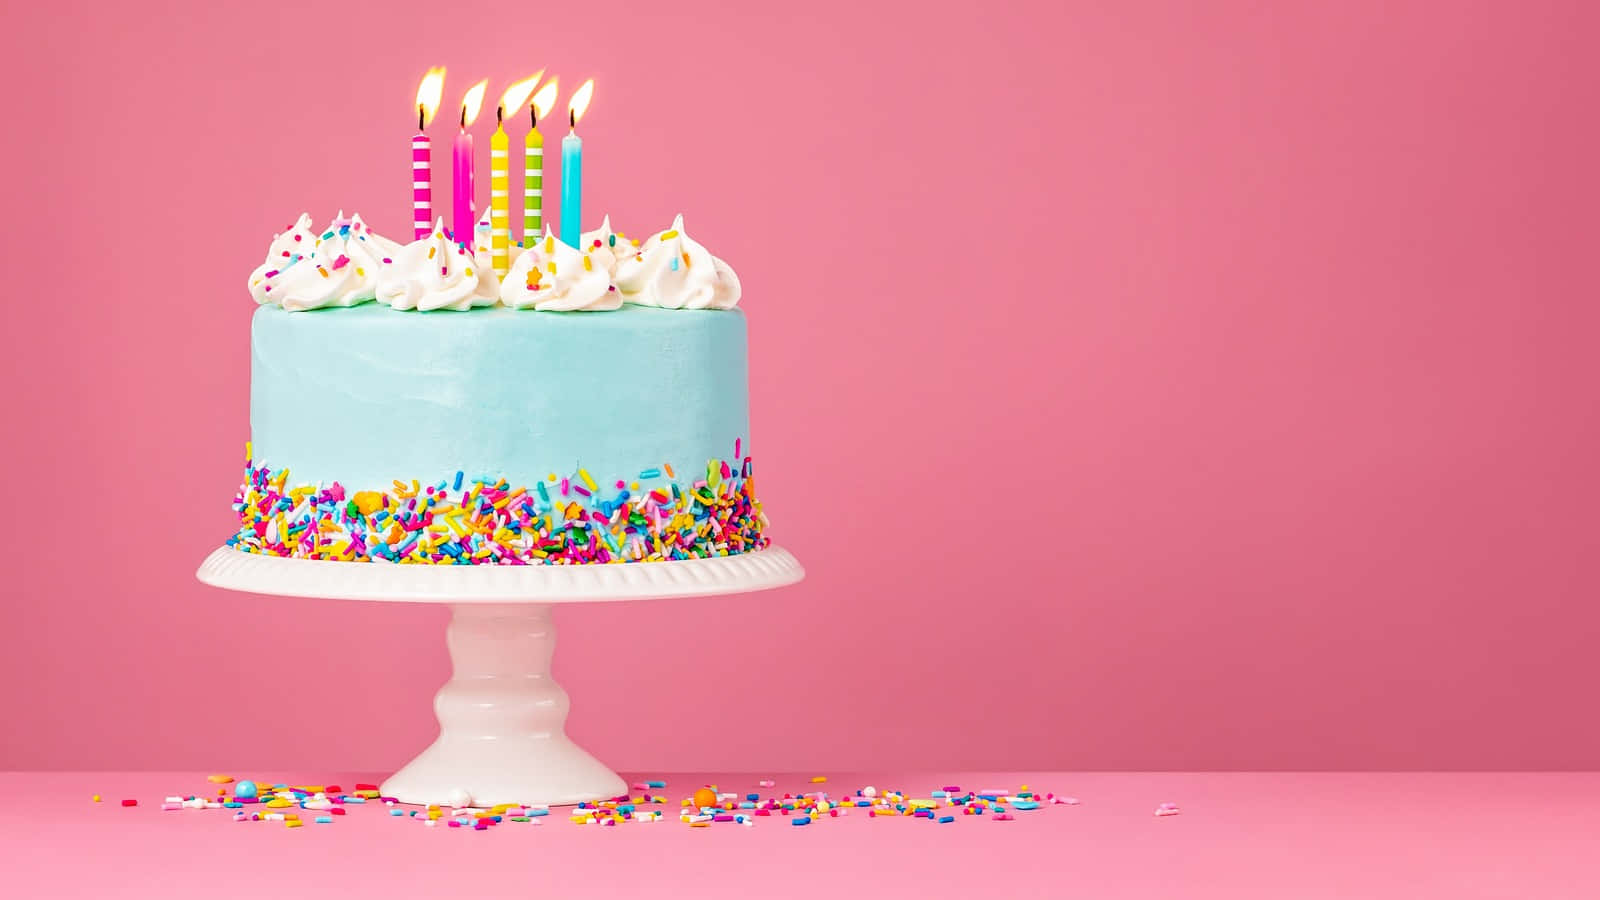 13 Things You Never Knew About the “Happy Birthday” Song | Happy birthday  cake images, Happy birthday cakes, Happy birthday cake pictures